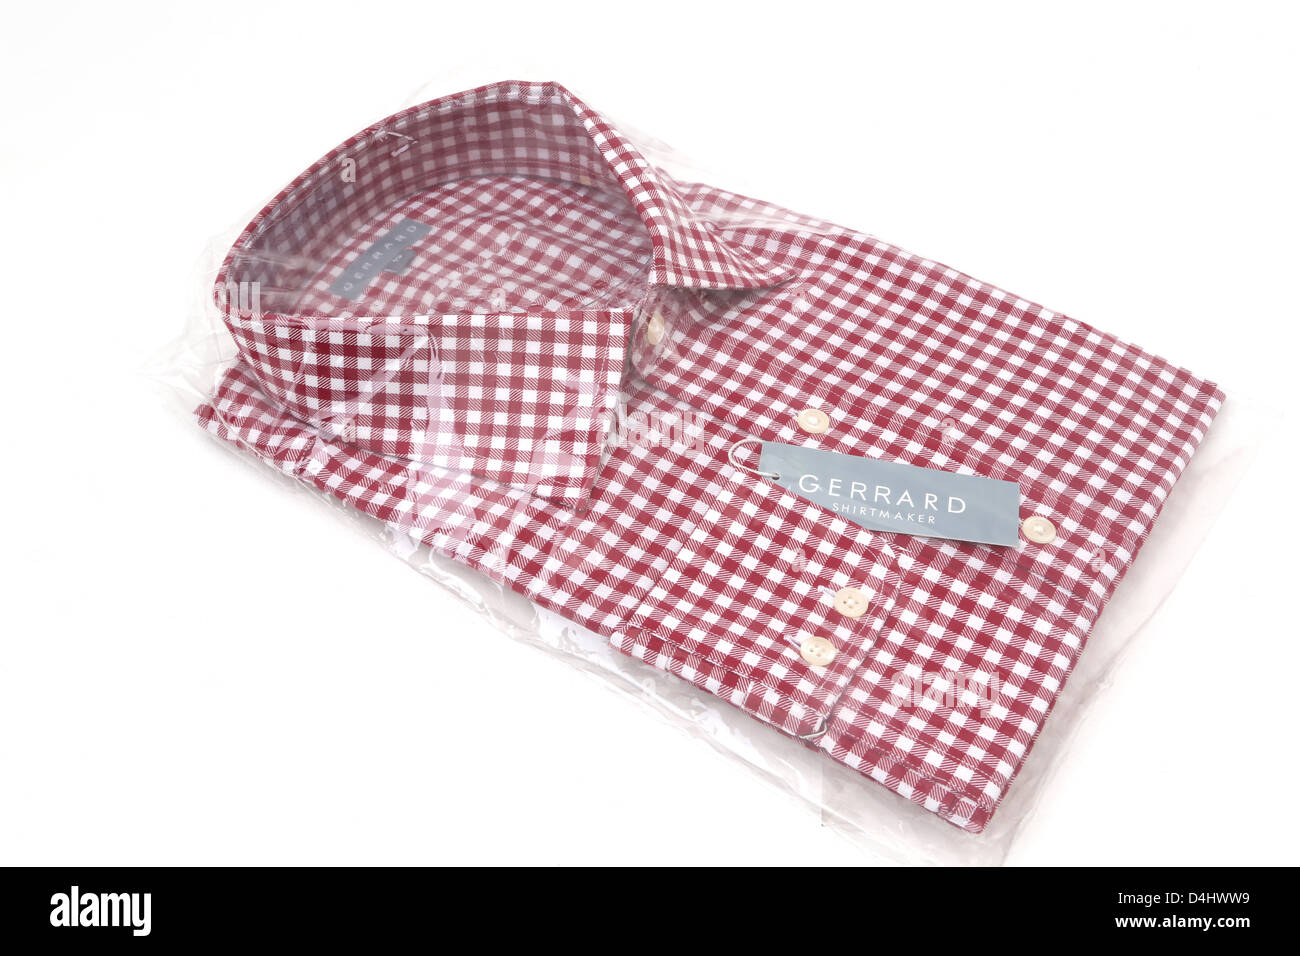 Gerrard Red And White Checkered Shirt Folded Up In Plastic Stock Photo